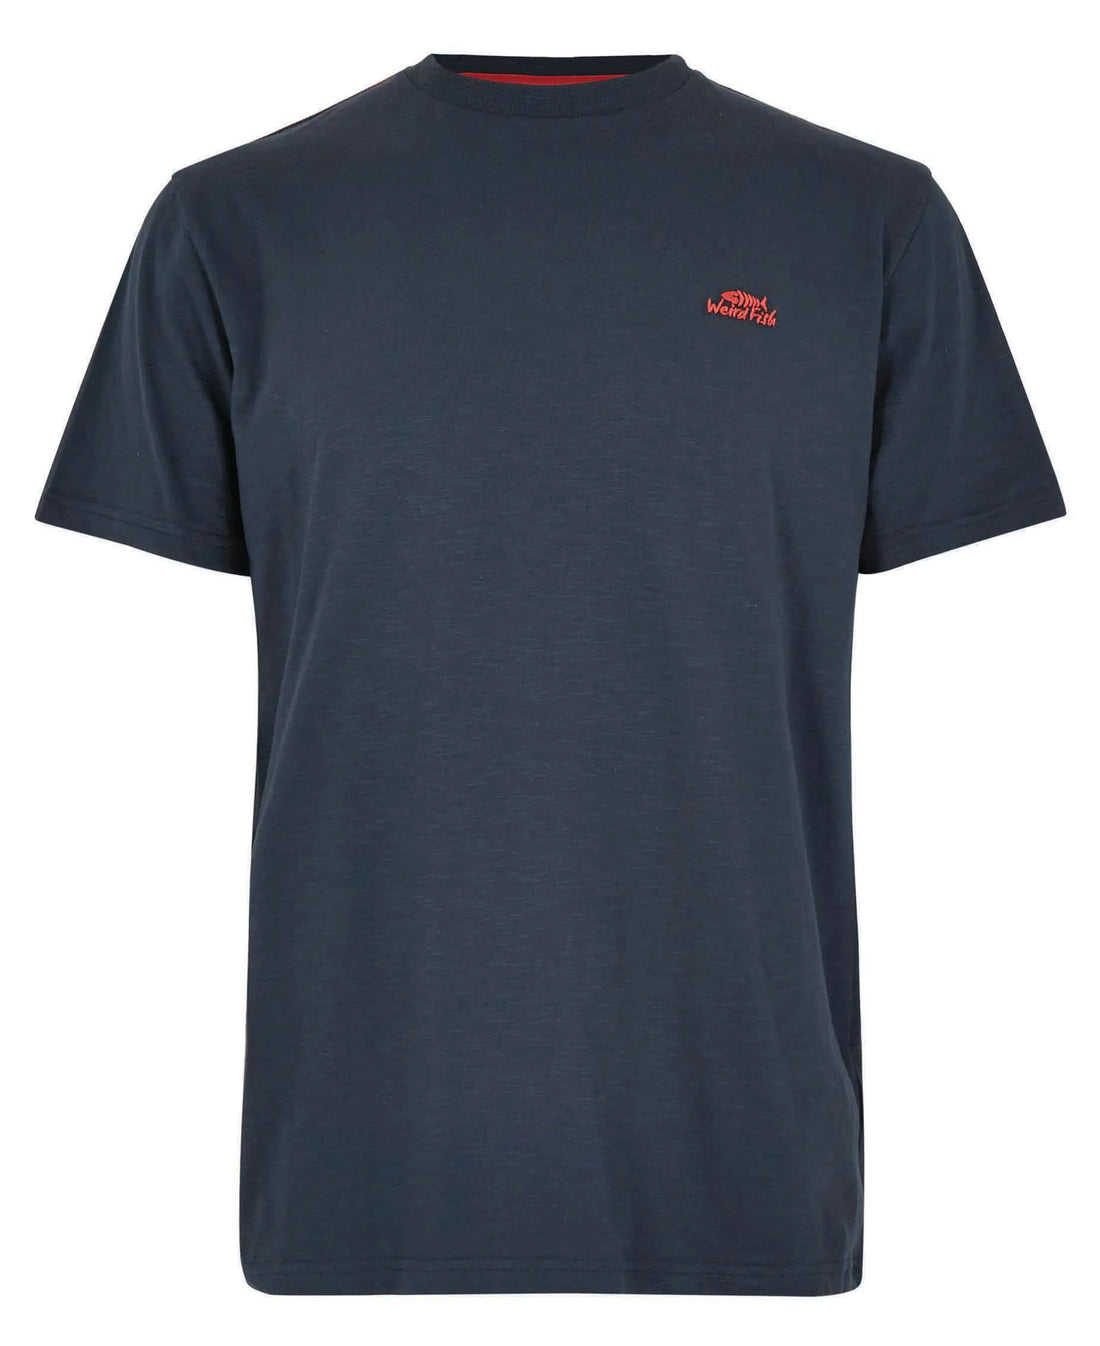 Fished Organic Branded Tee - Navy